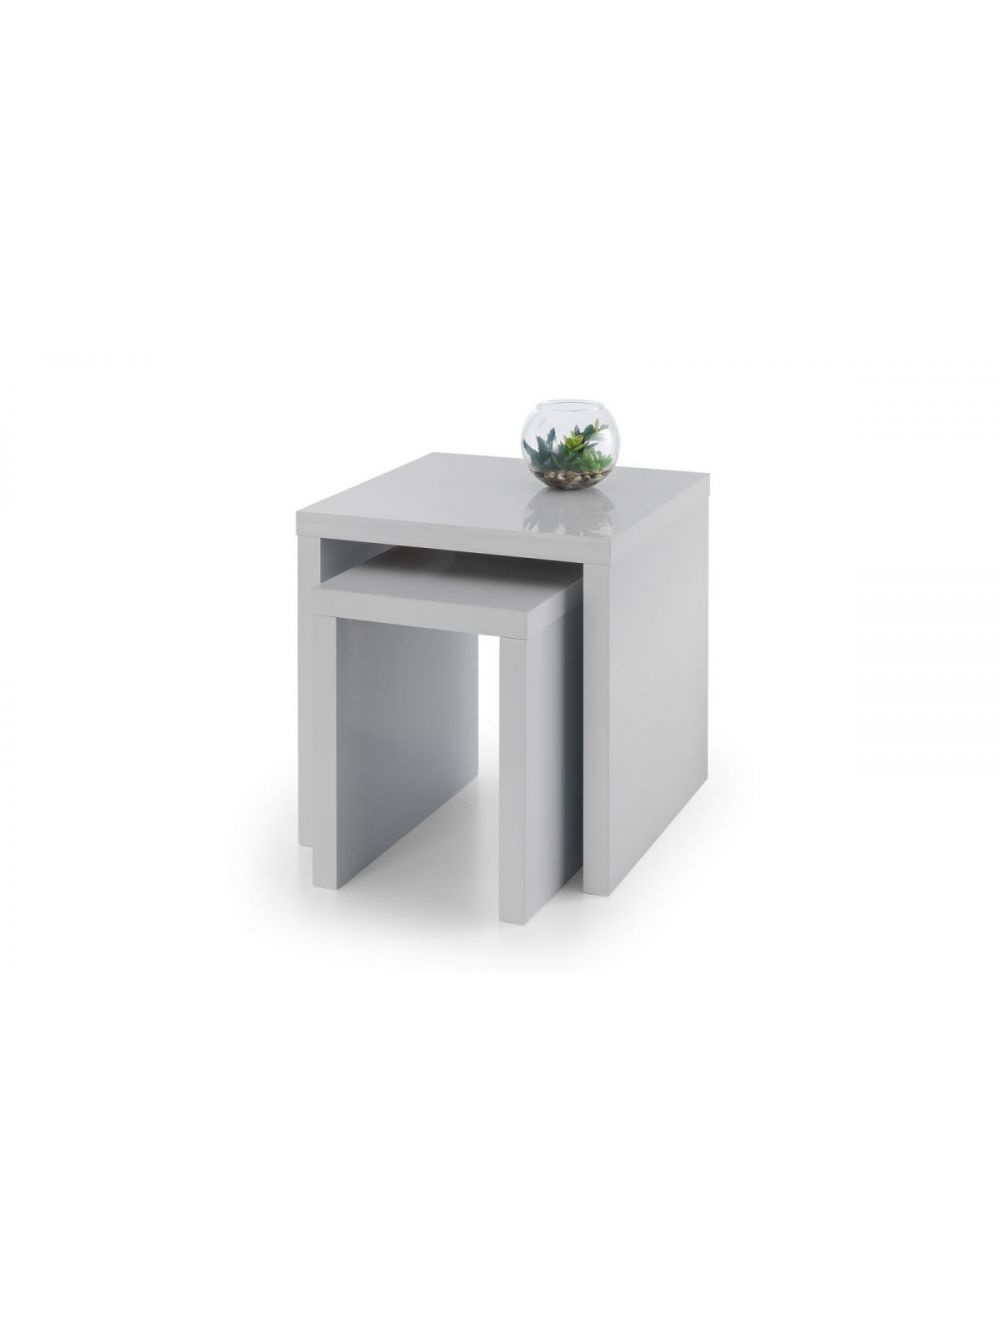 Metro Grey High Gloss Nest Of Tables, White High Gloss Tall Side Table